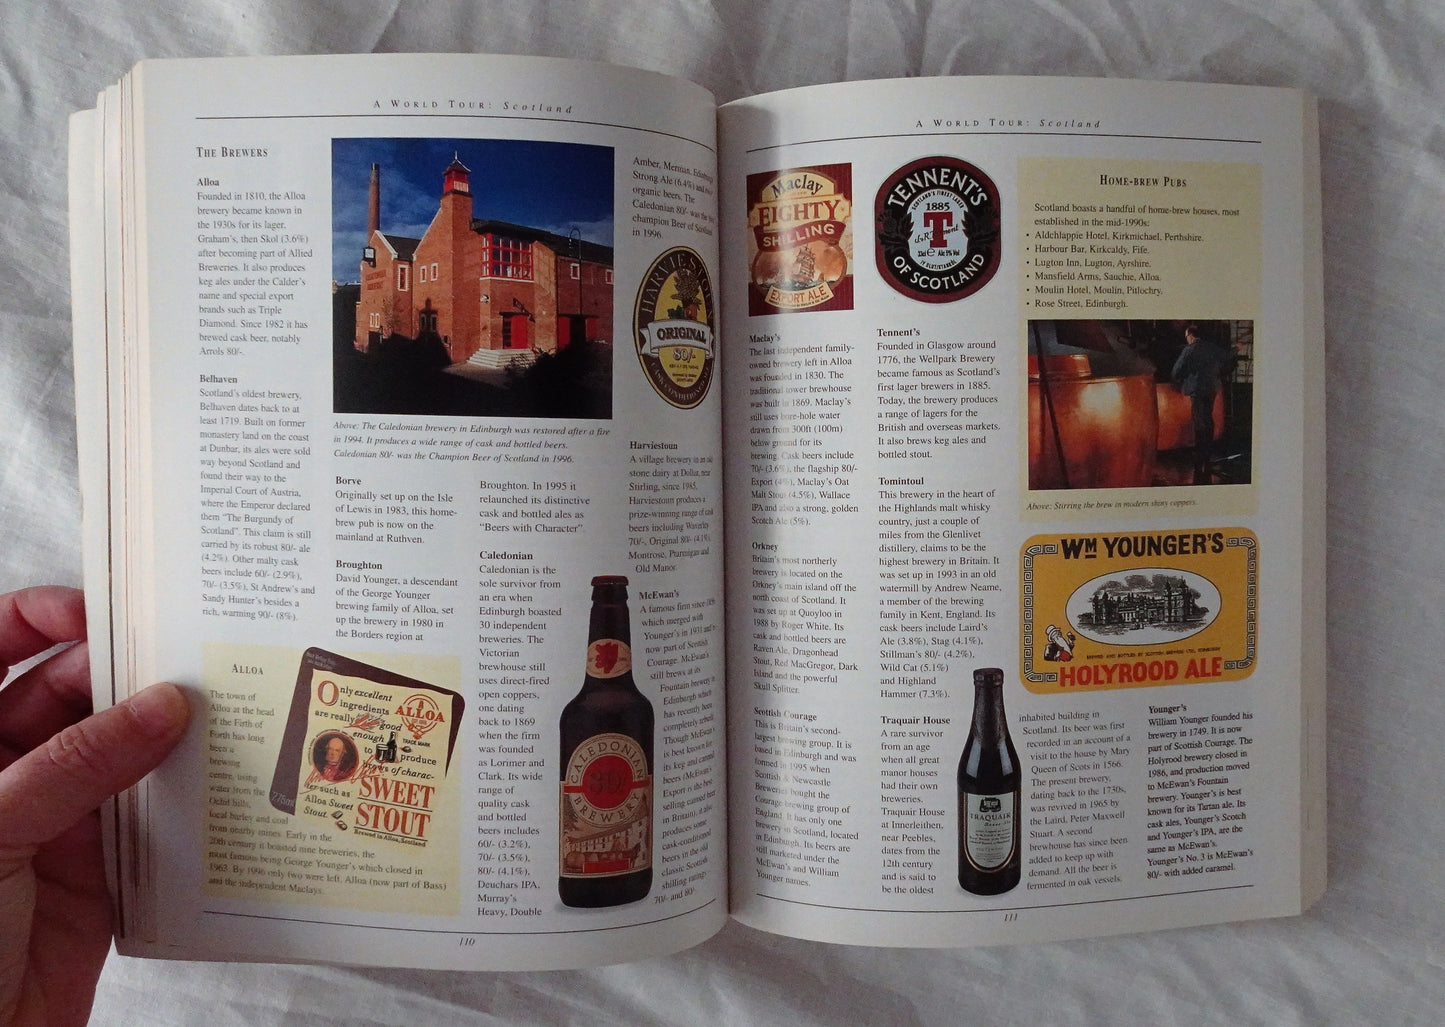 The Complete Guide to Beer by Brian Glover